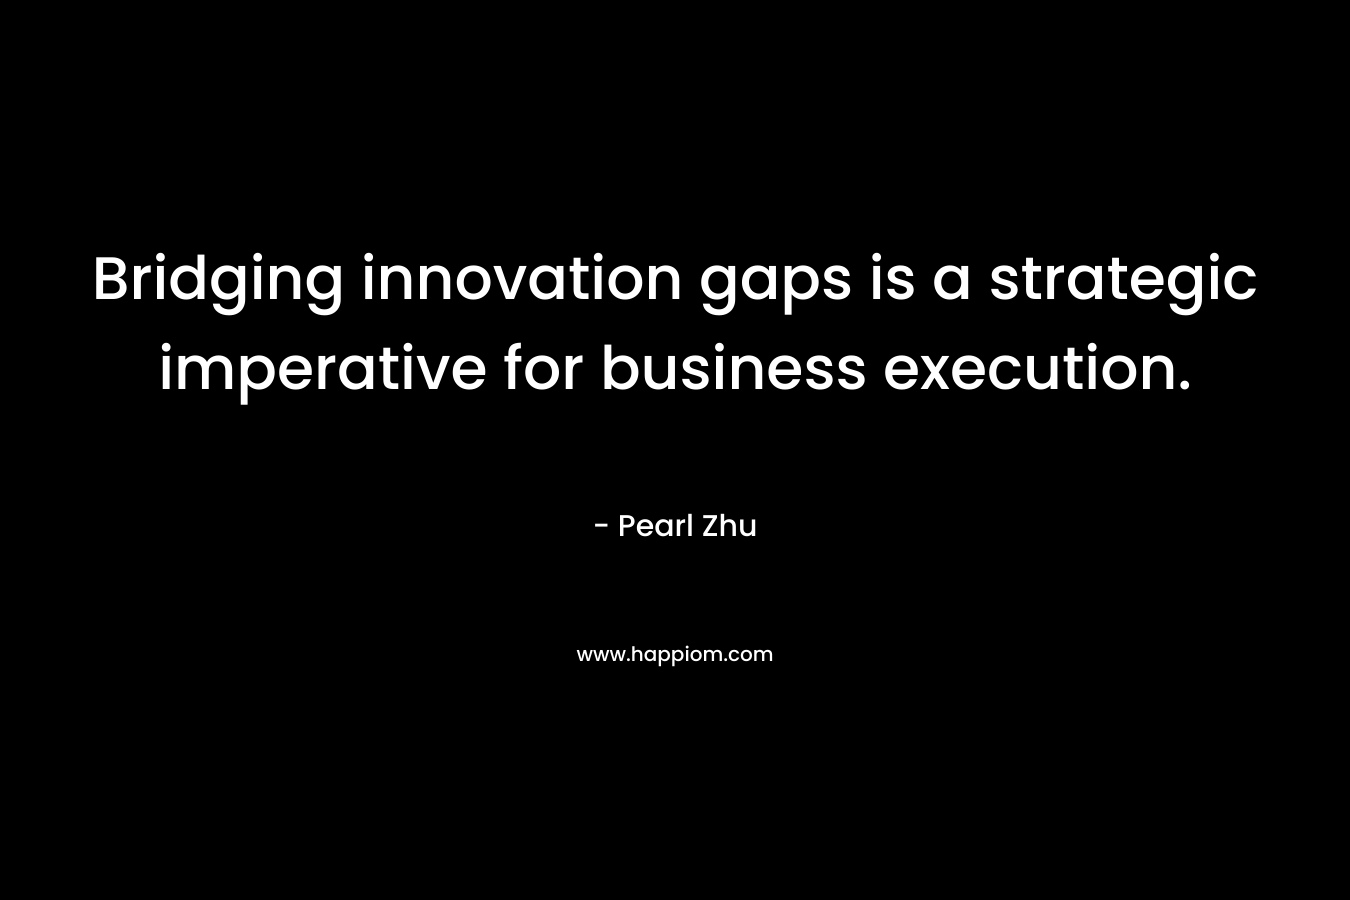 Bridging innovation gaps is a strategic imperative for business execution.